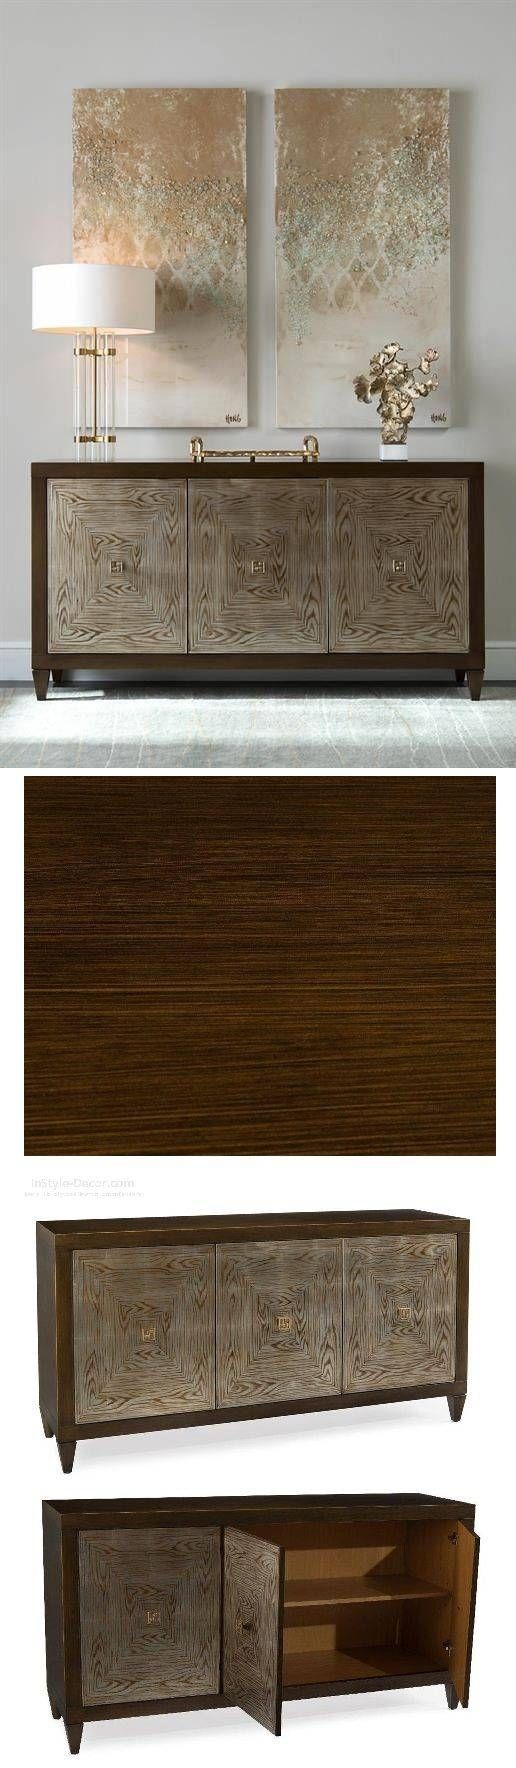 Best 25+ Modern Buffet Ideas On Pinterest | Contemporary Buffets Throughout Sideboards For Living Room (View 17 of 30)